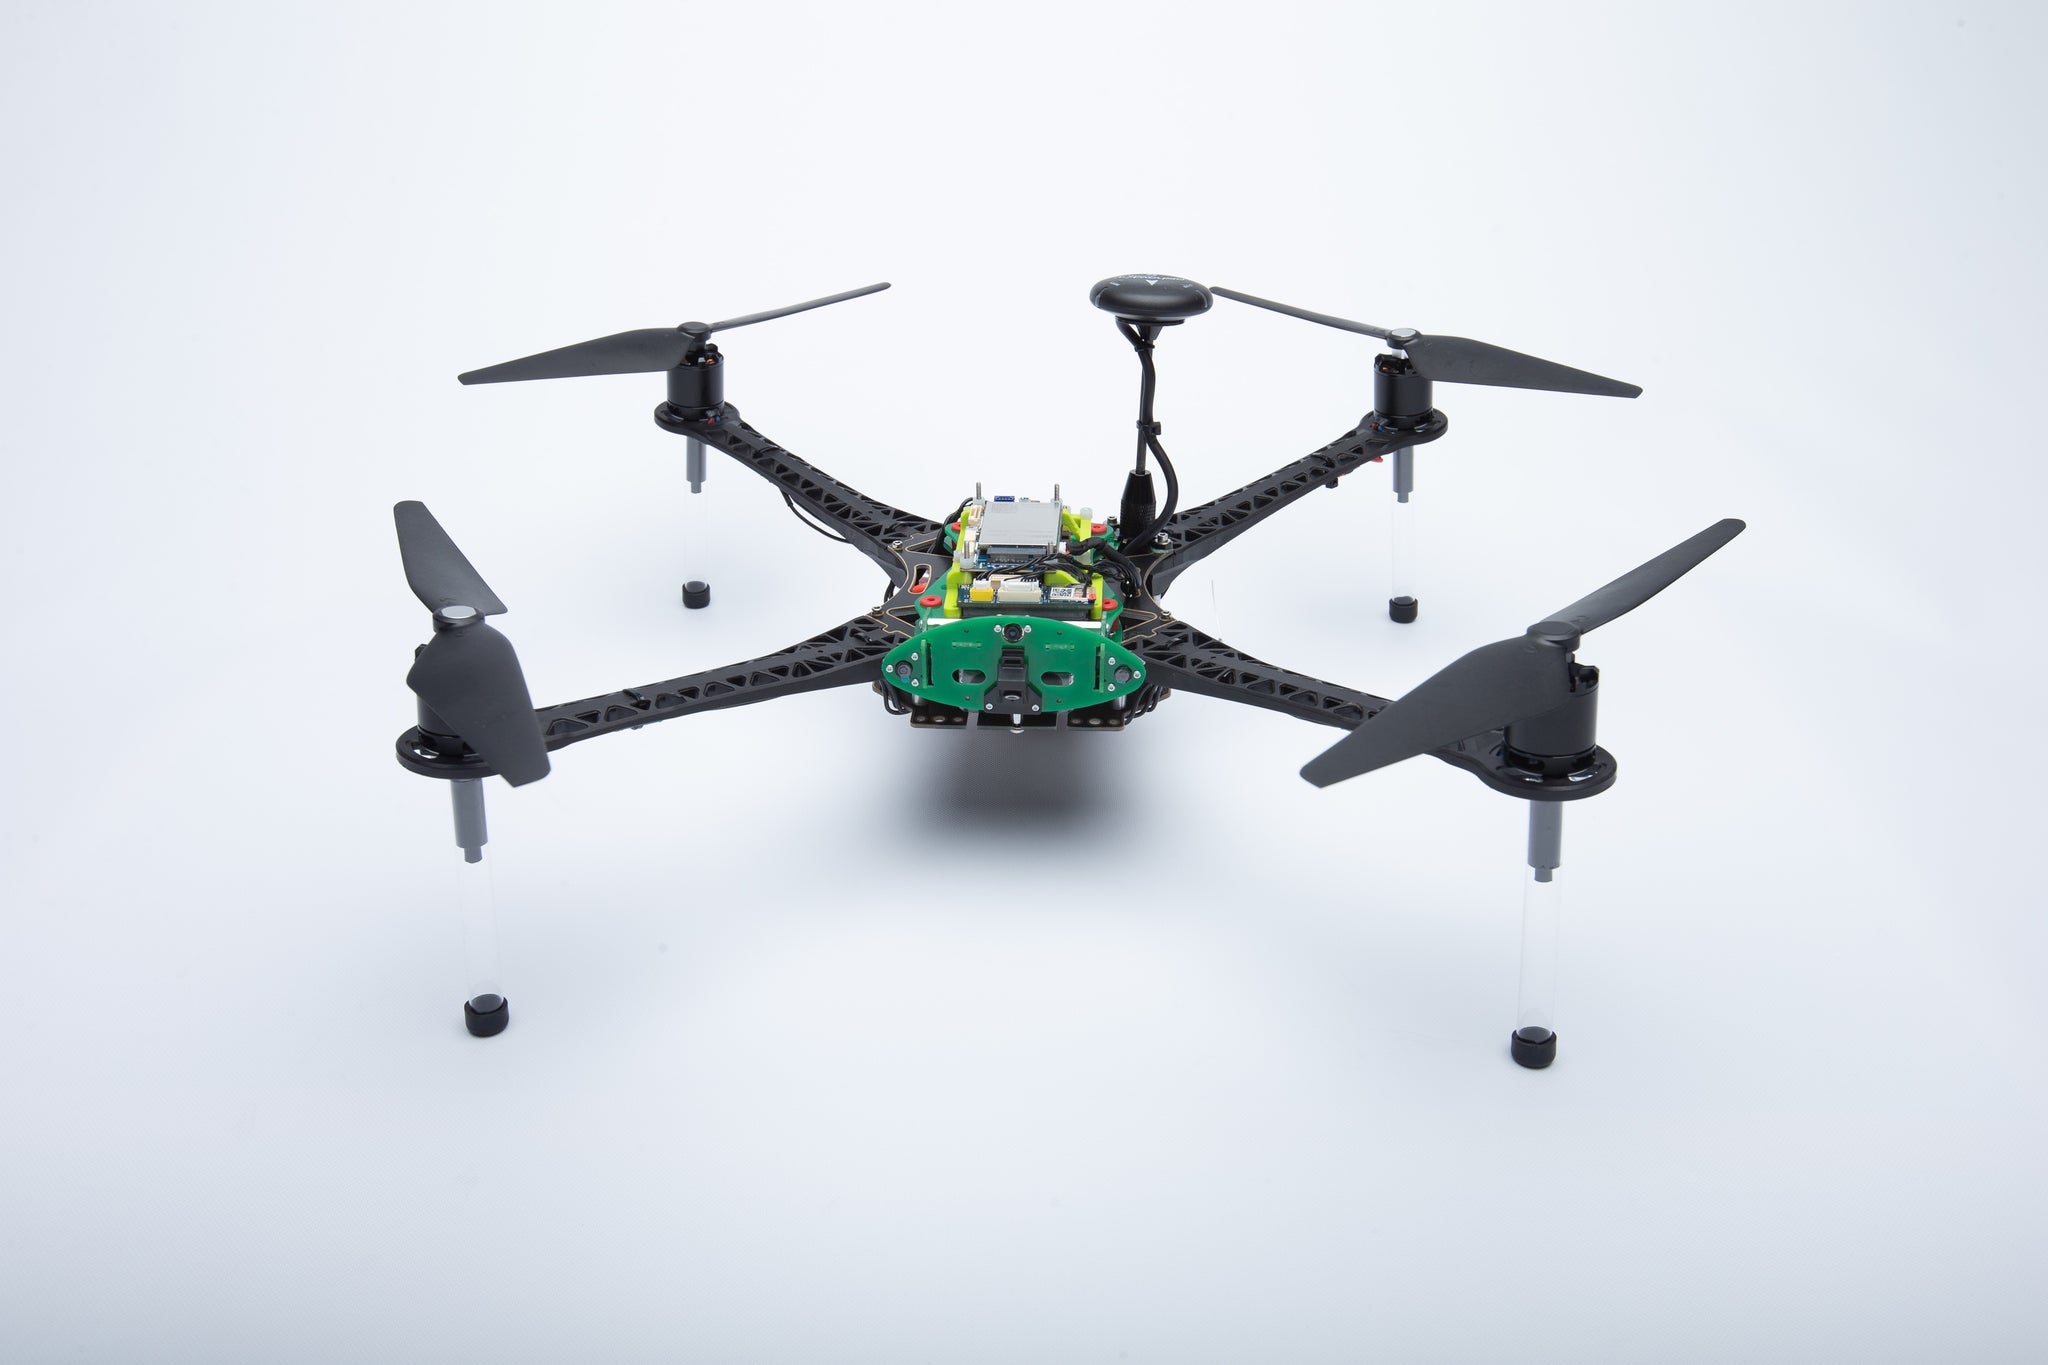 ModalAI Serves as Distributor for Qualcomm’s World First 5G and AI-Enabled Drone Platform and Reference Design